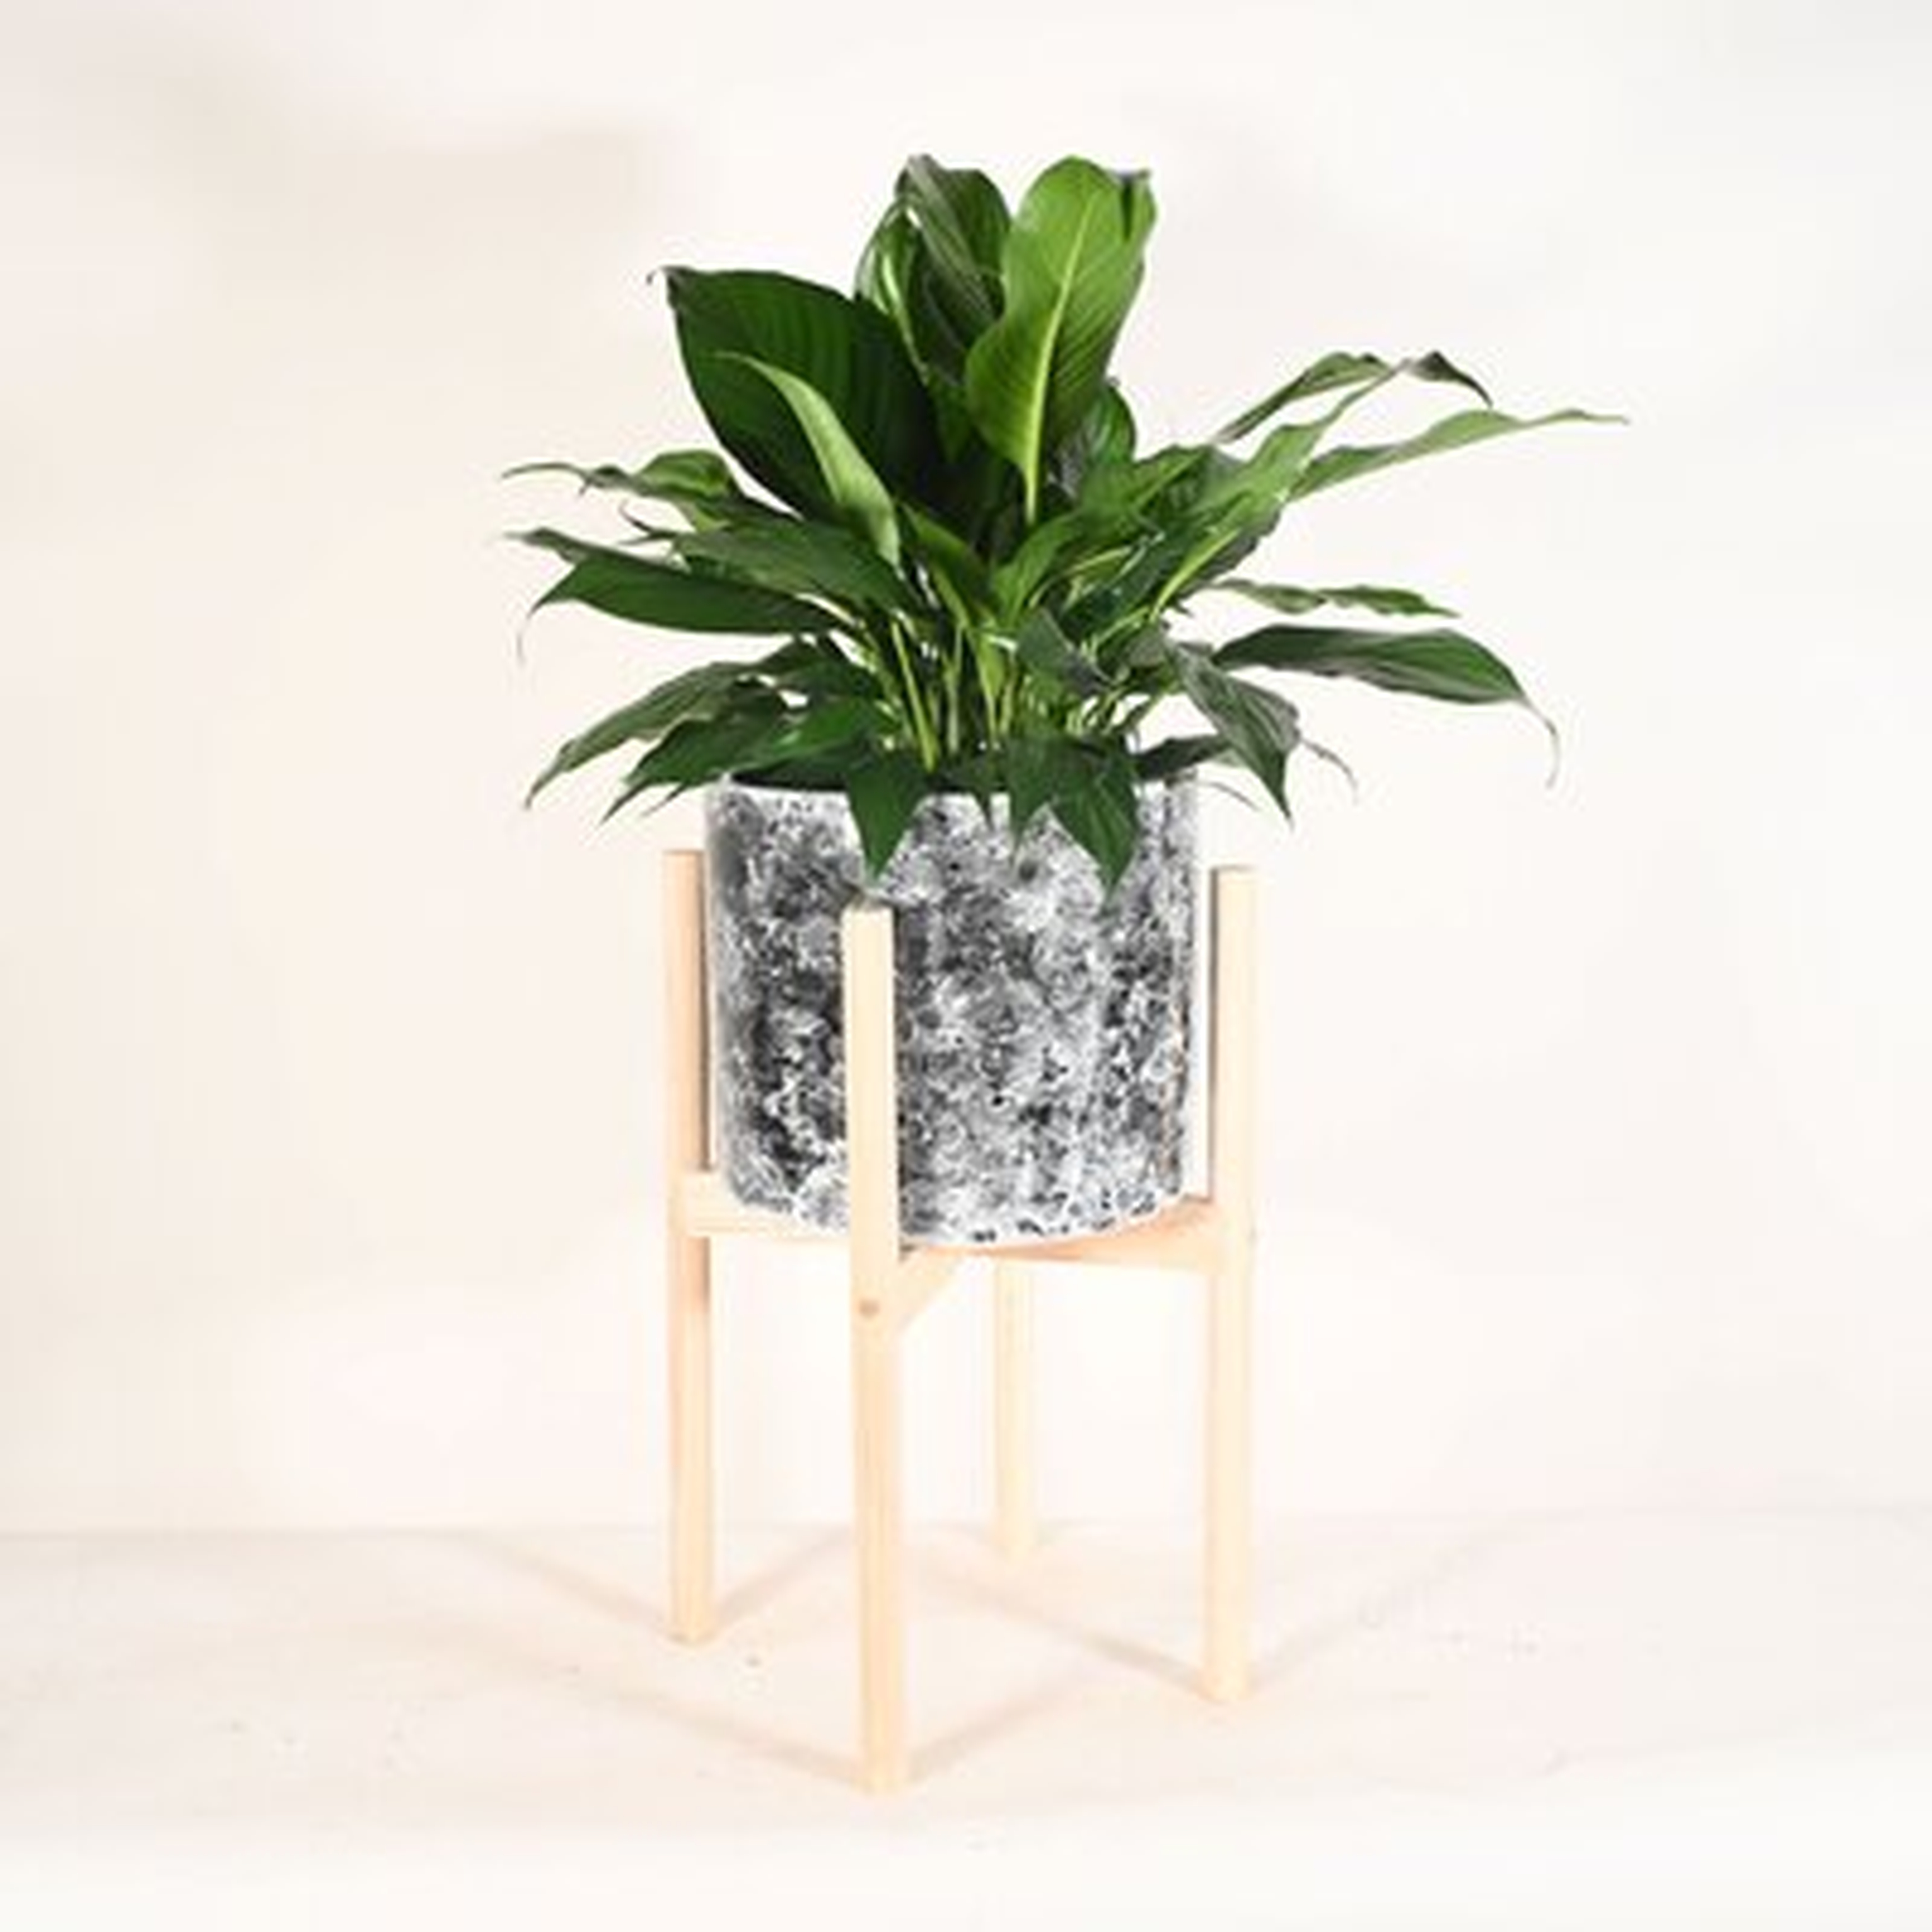 Live Plant Peace Lily With Mid Century Modern Ceramic Planter Pot 10" Black Marble With Wood Stands Natural - Wayfair